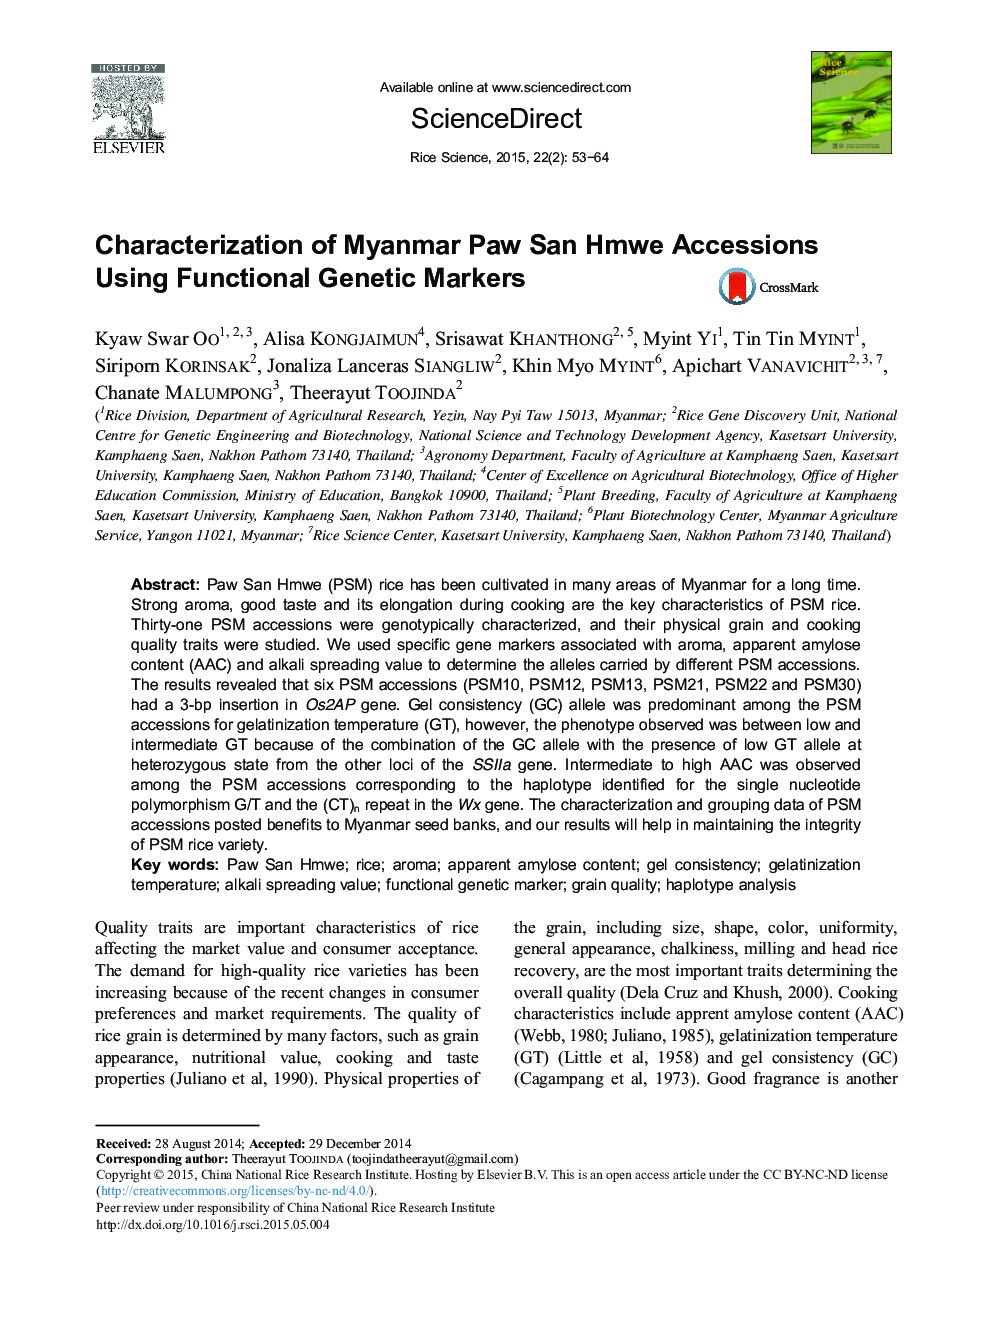 Characterization of Myanmar Paw San Hmwe Accessions Using Functional Genetic Markers 